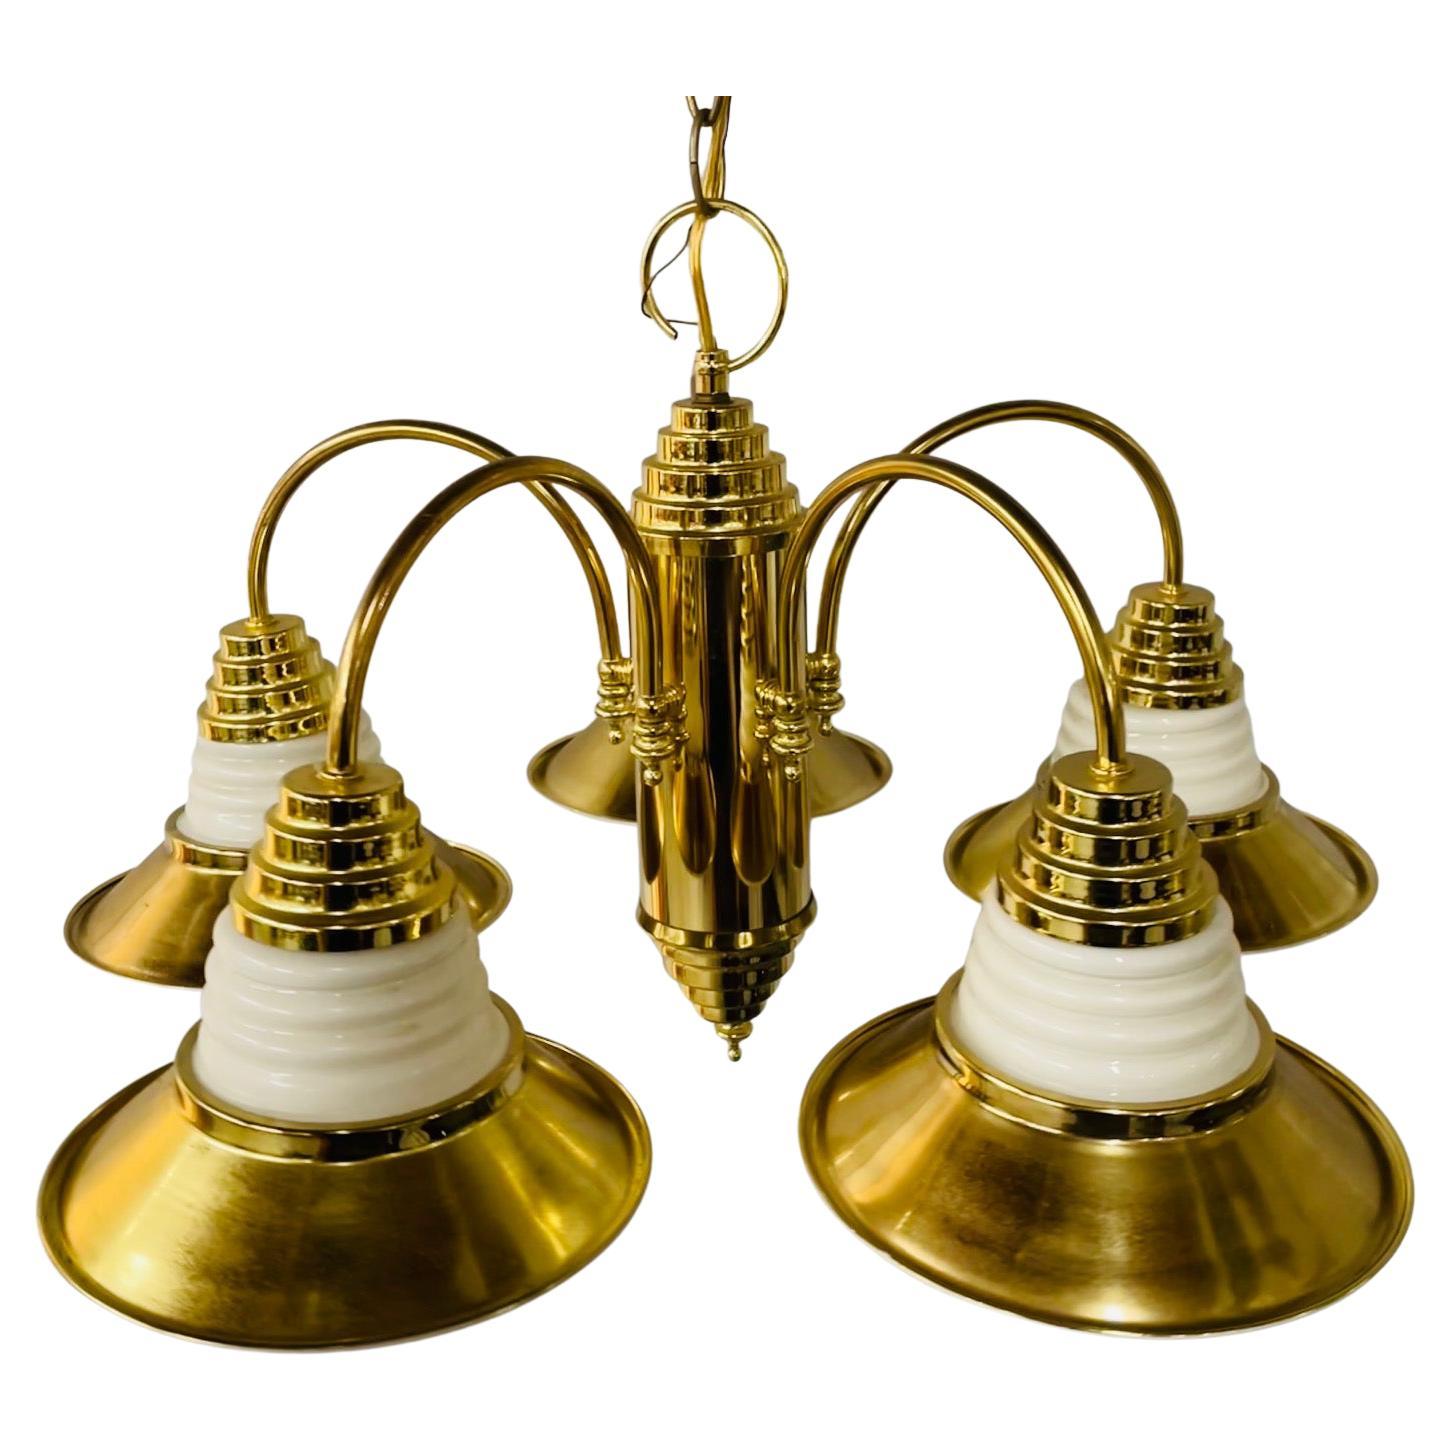 Art Deco Style Brass Torch Style 5 Arms Chandelier or Pendant